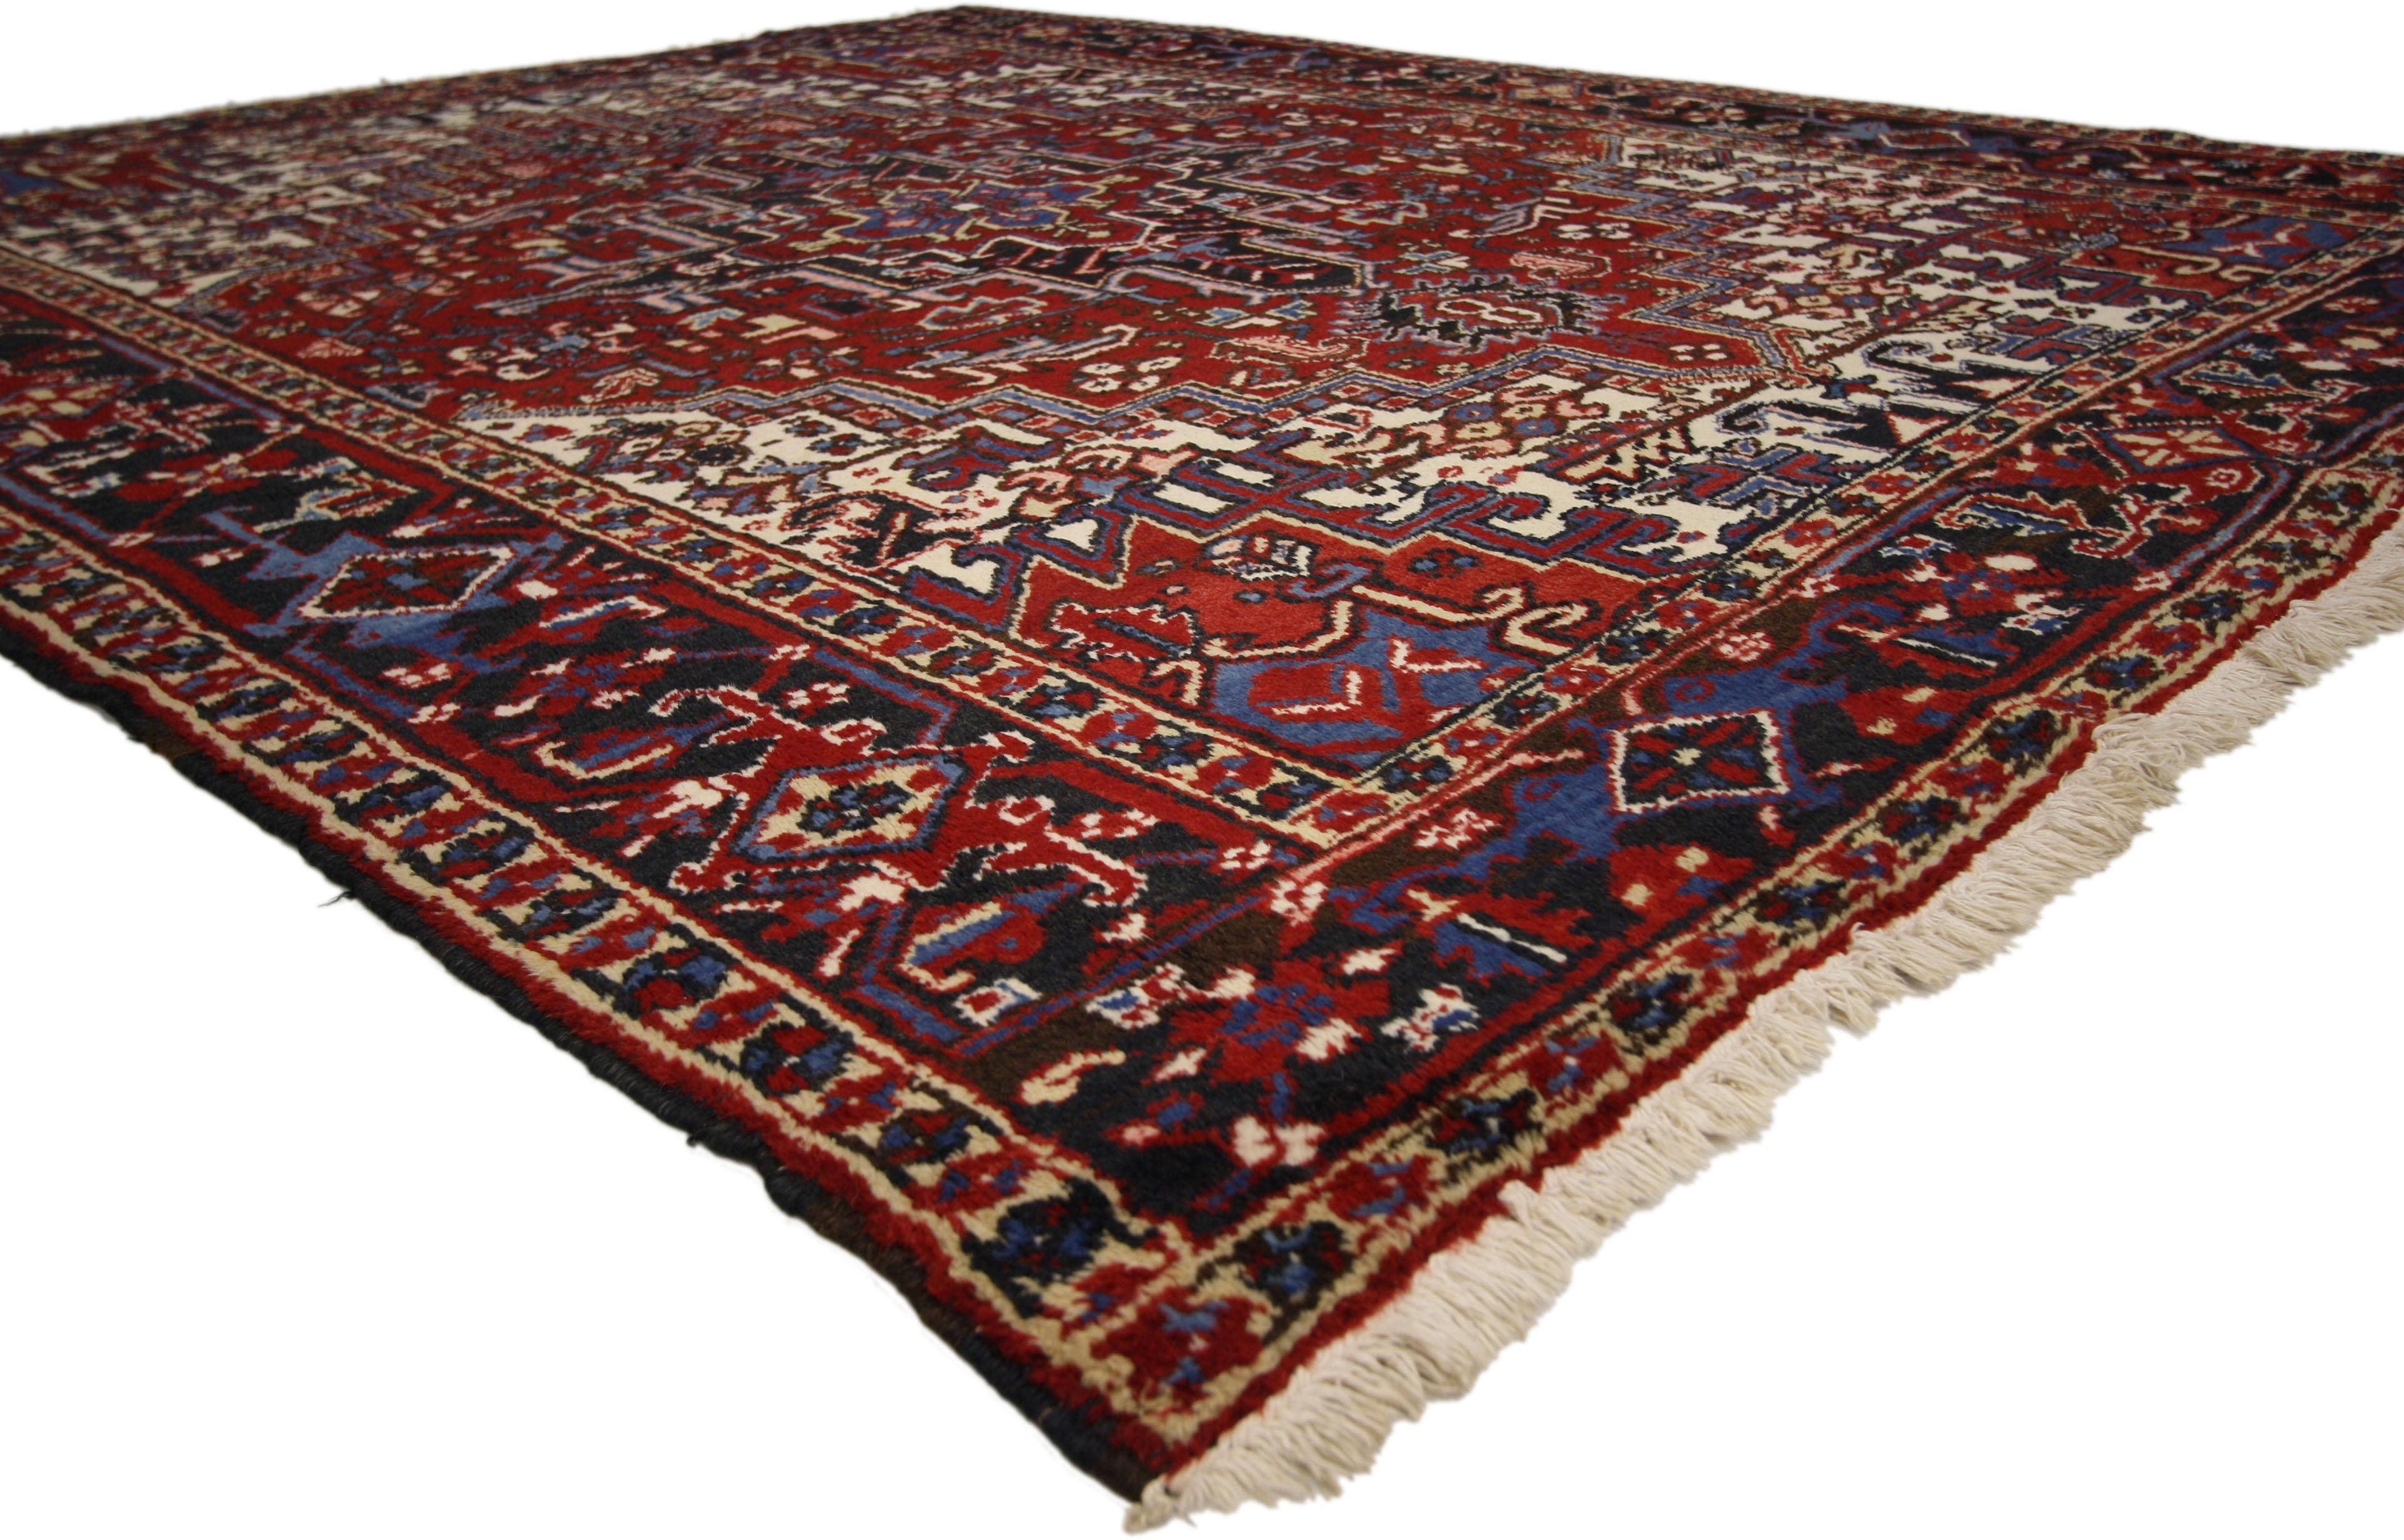 71255, vintage Persian Heriz rug with Manor House and Tudor style. This vintage Persian Heriz rug features a Mid-Century Modern style in traditional colors. Rendered in red, navy, blue, and ivory with accents of brown. This vintage Heriz rug has